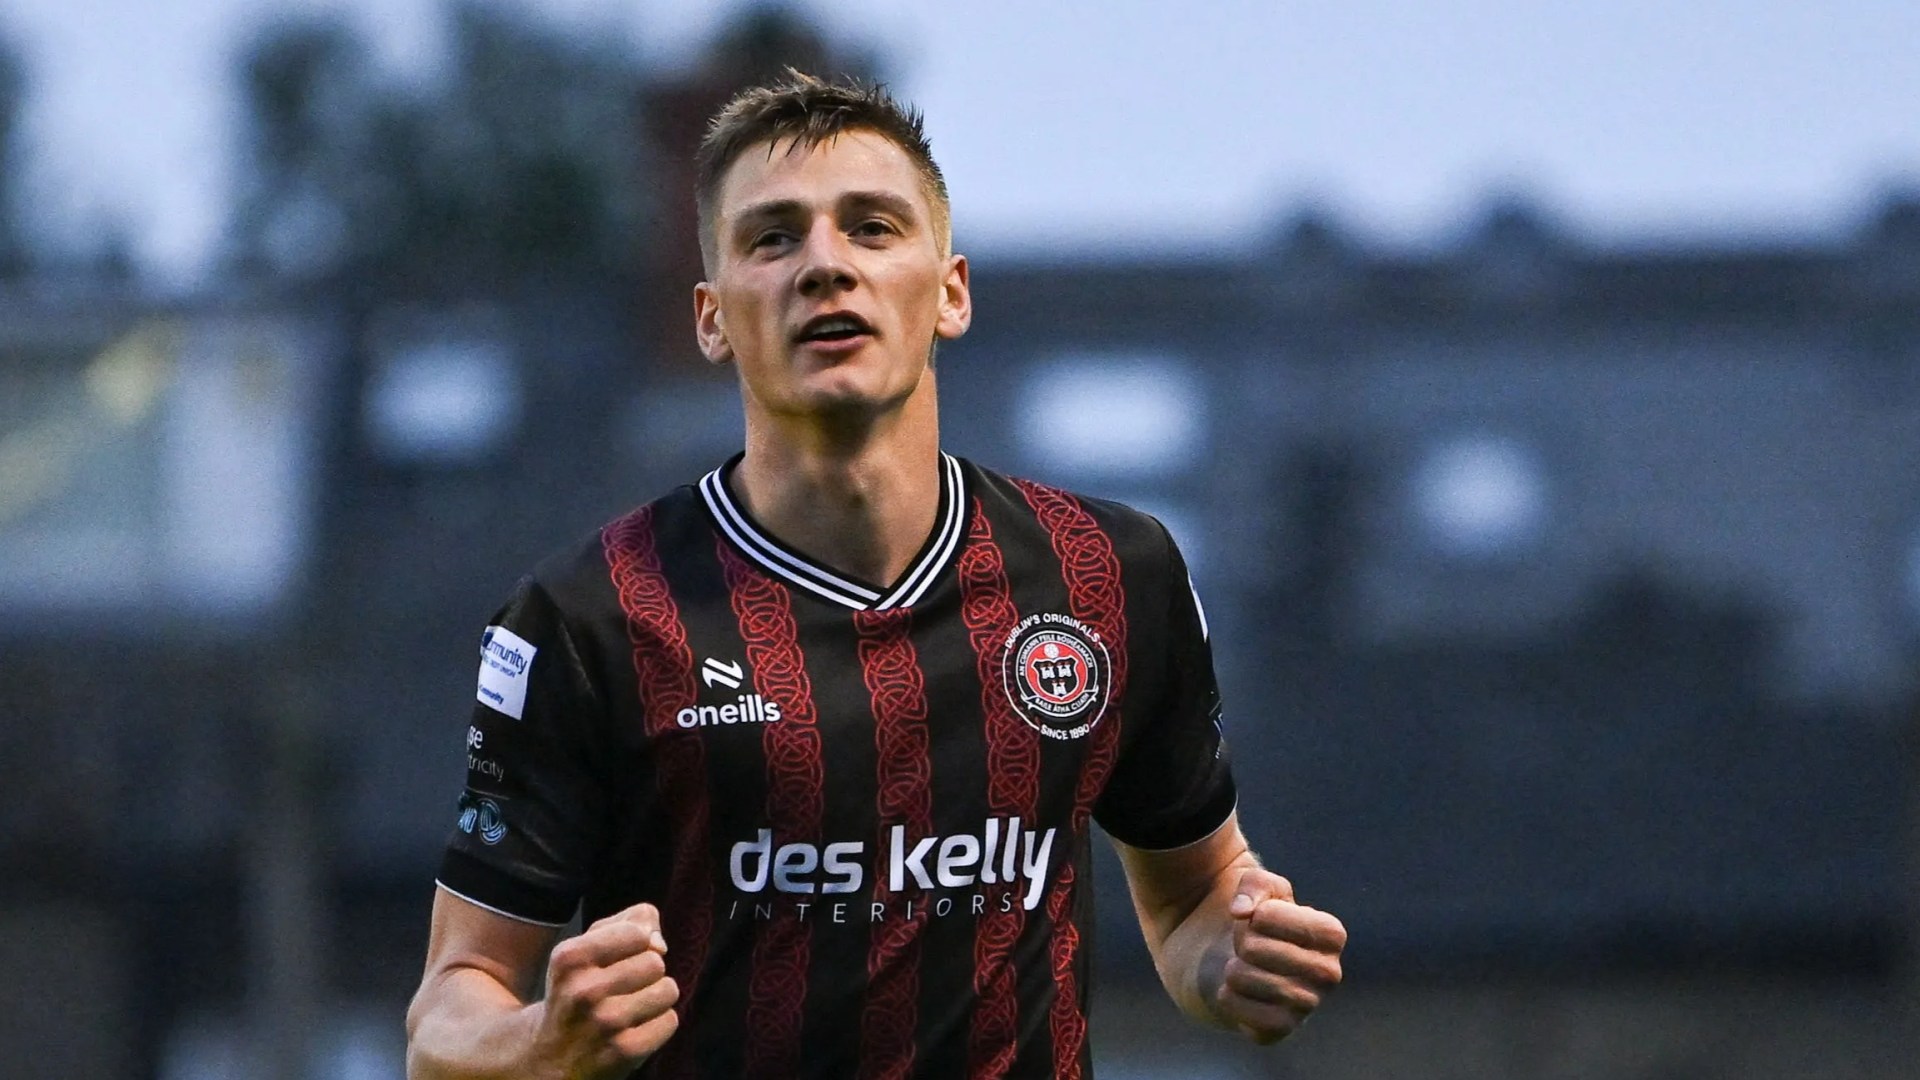 Bohemians and Shamrock Rovers share the spoils in Dublin derby as Filip Pisczczek opens his account for The Gypsies [Video]